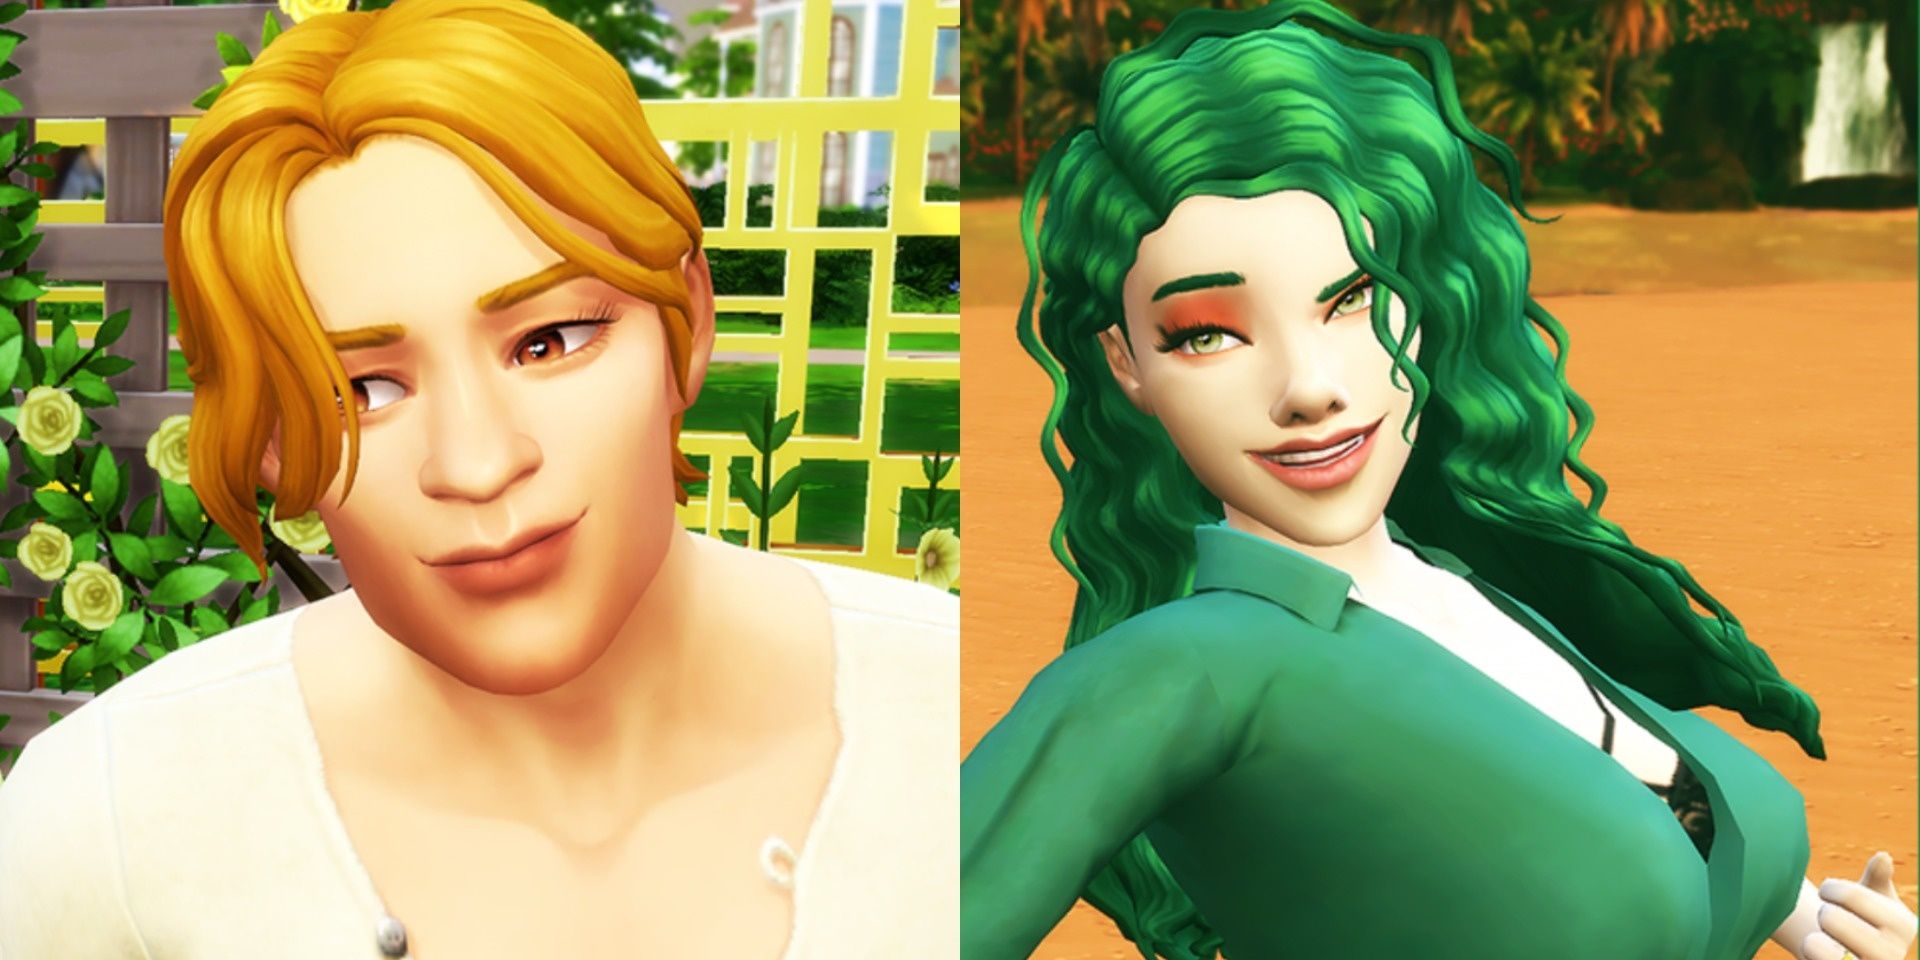 A split image of two Greek God-inspired Sims; Apollo on the left, Aphrodite on the right